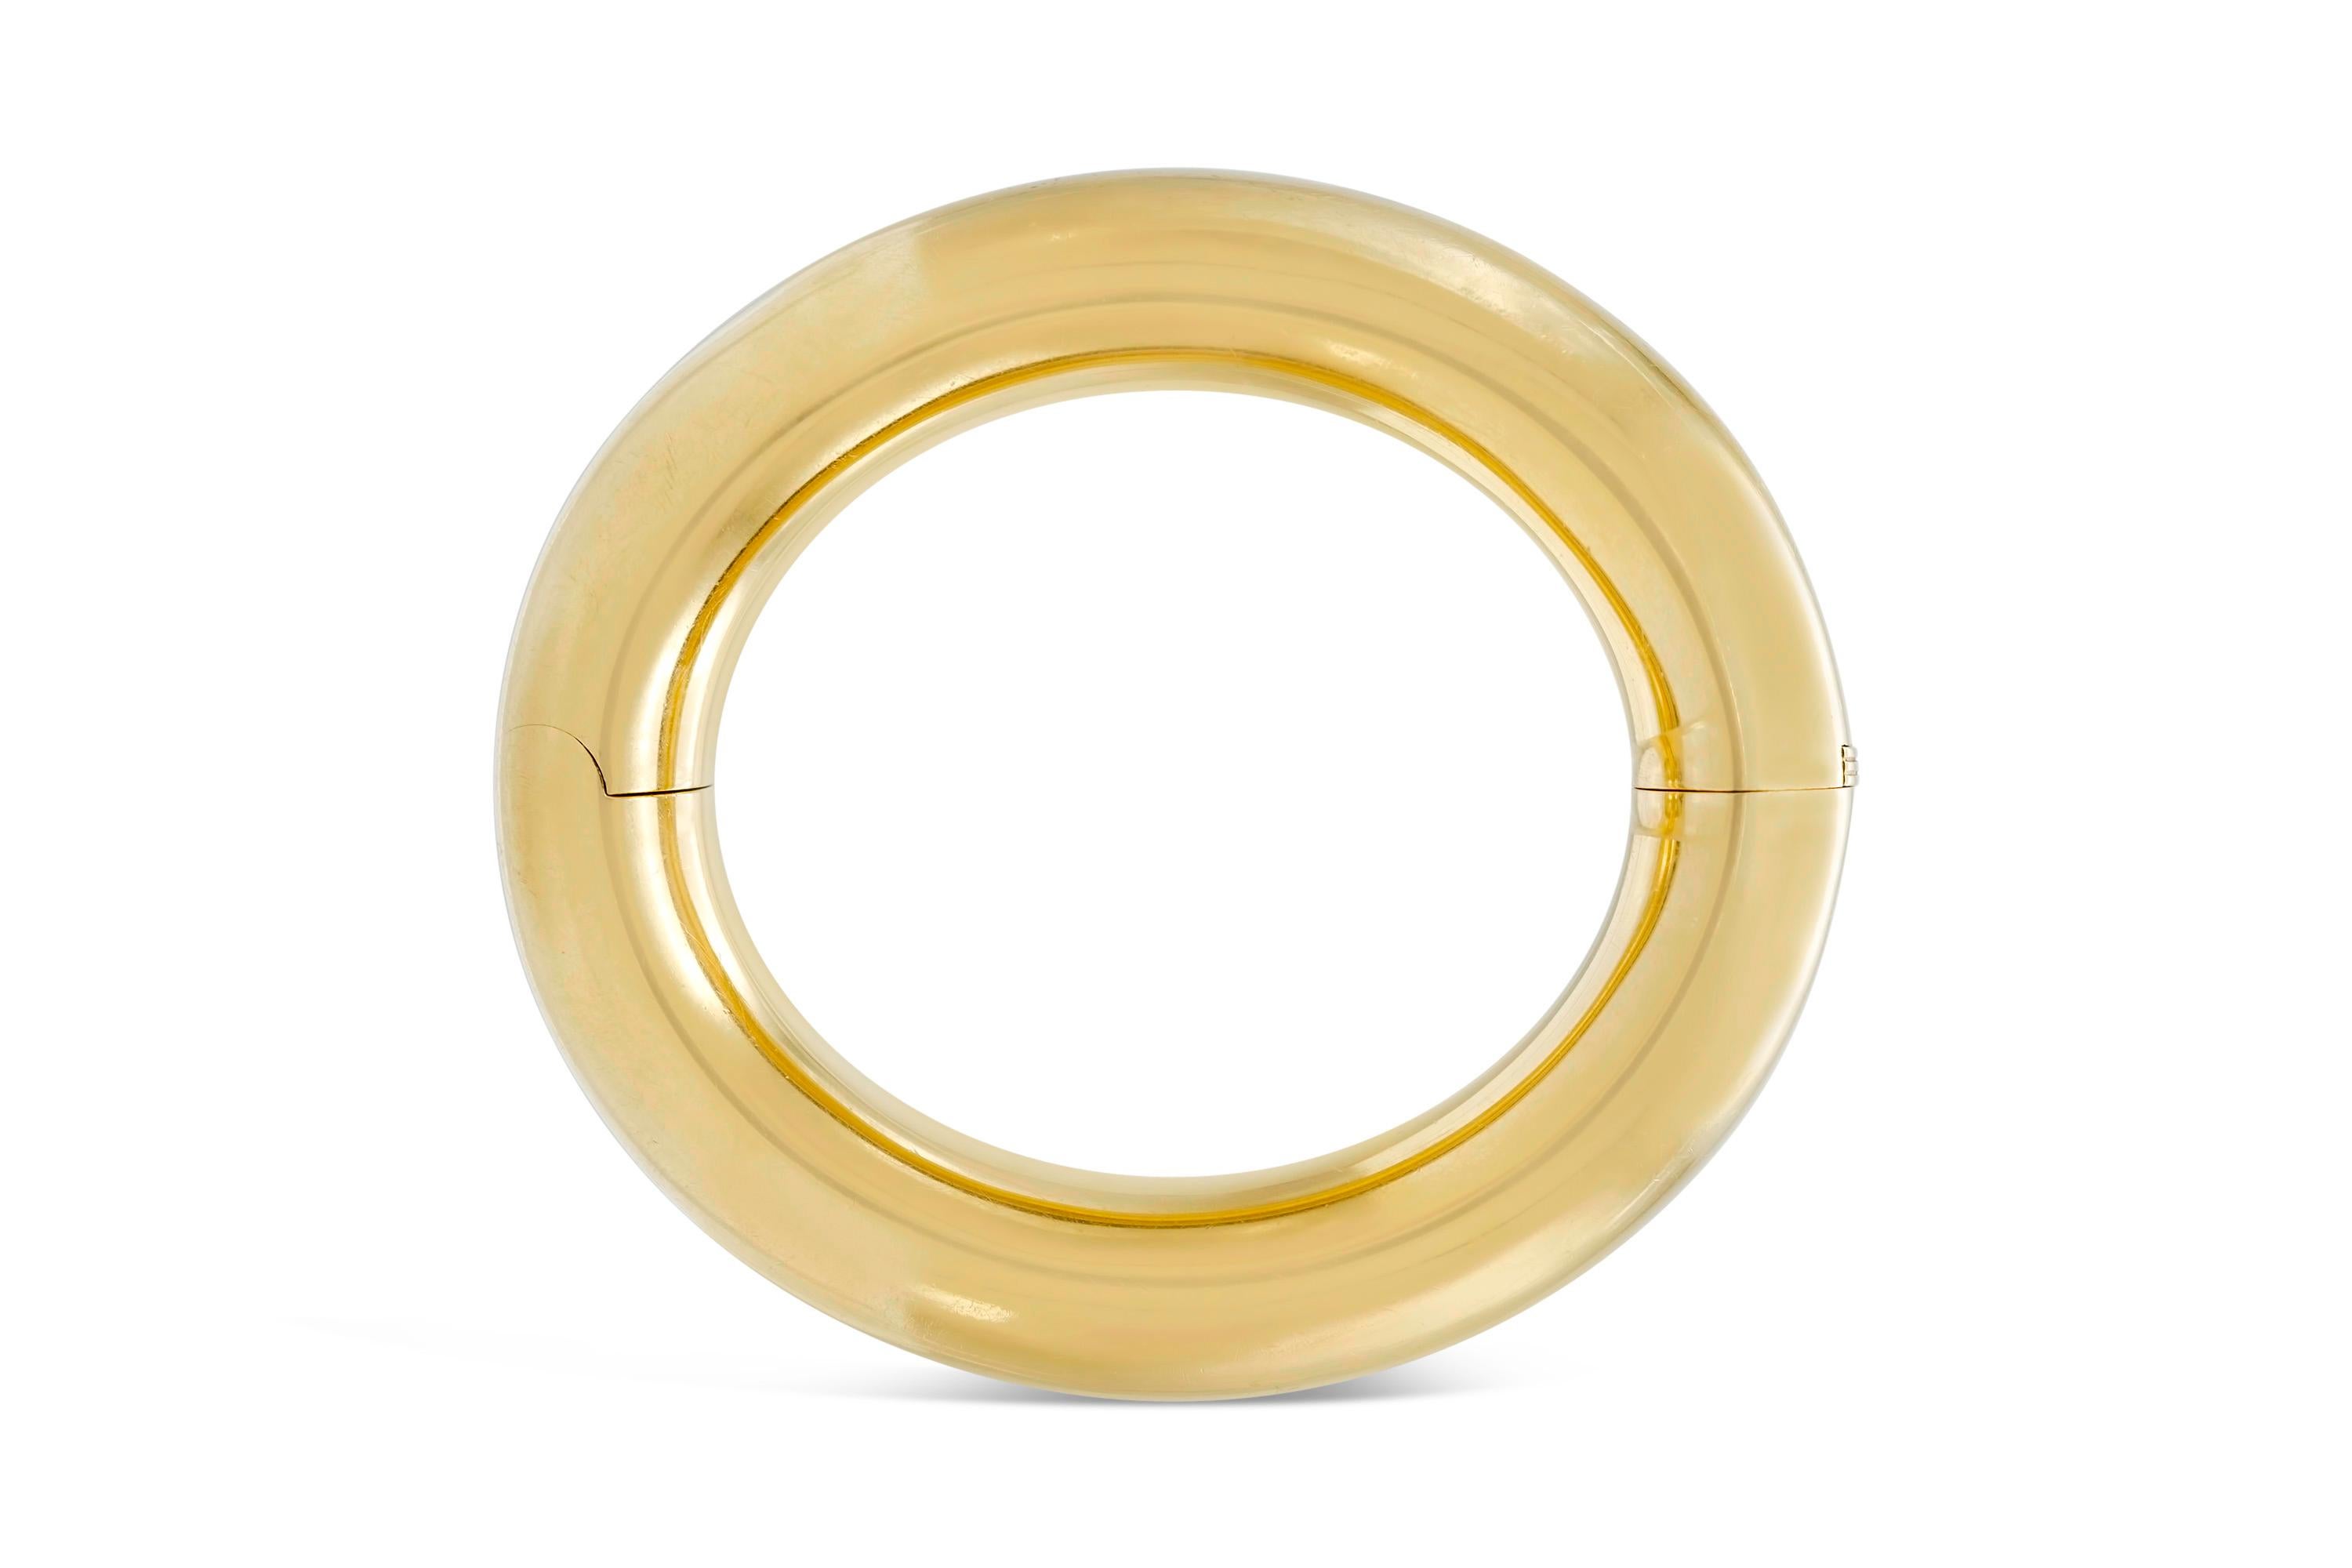 Bombe Gold Seamless Hinged Bangle Bracelet In Good Condition For Sale In New York, NY